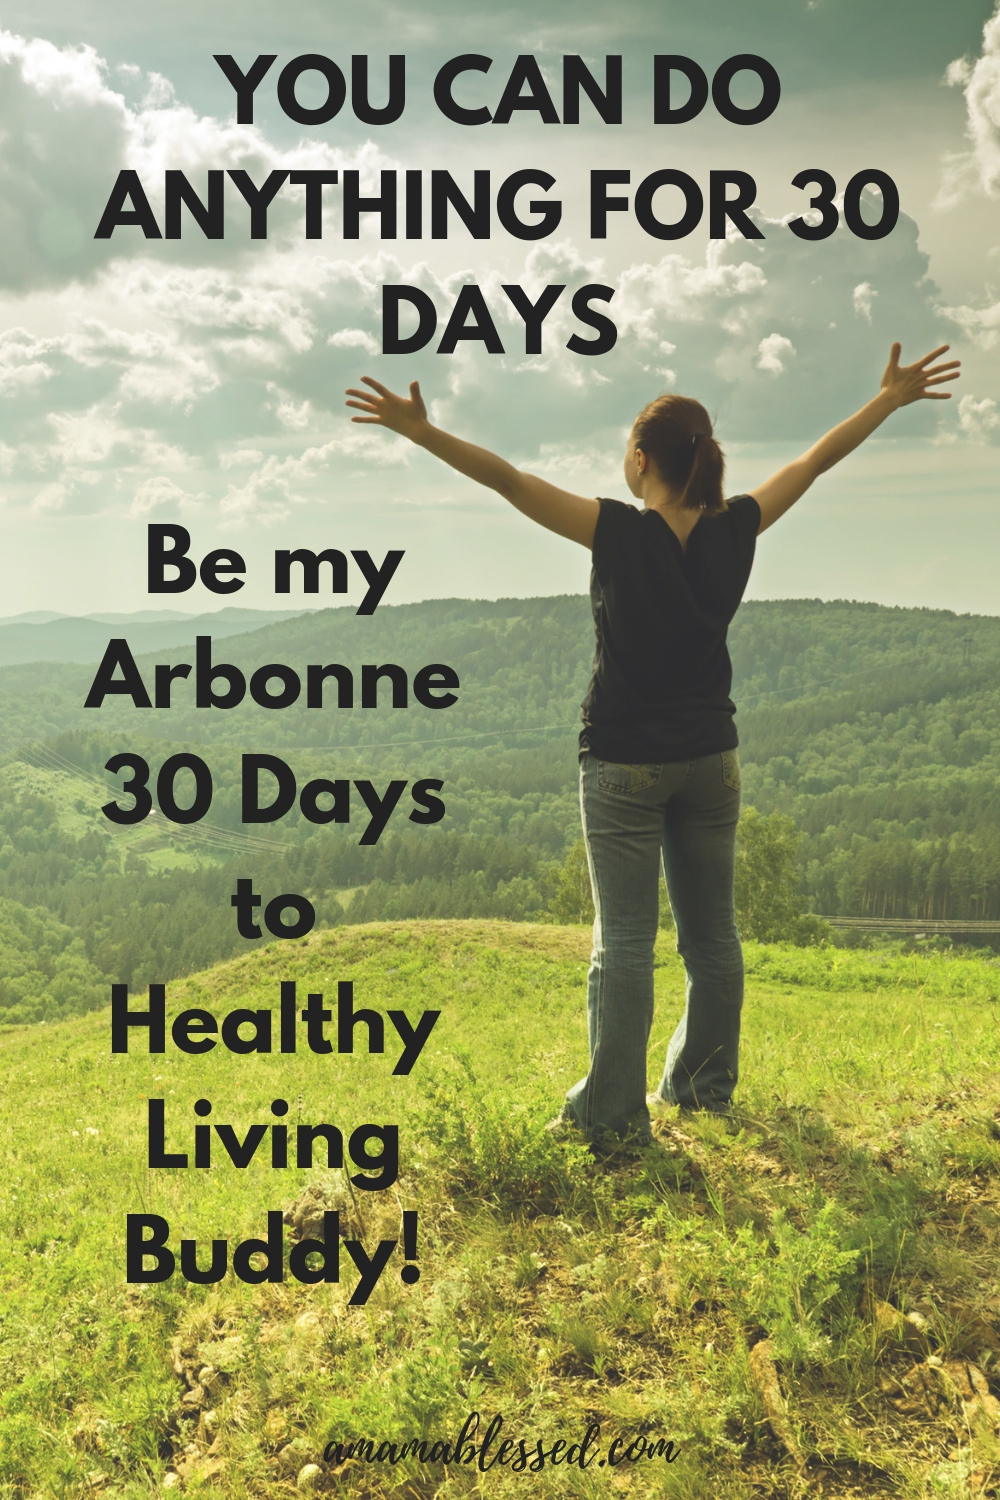 Arbonne 30 Days to Healthy Living